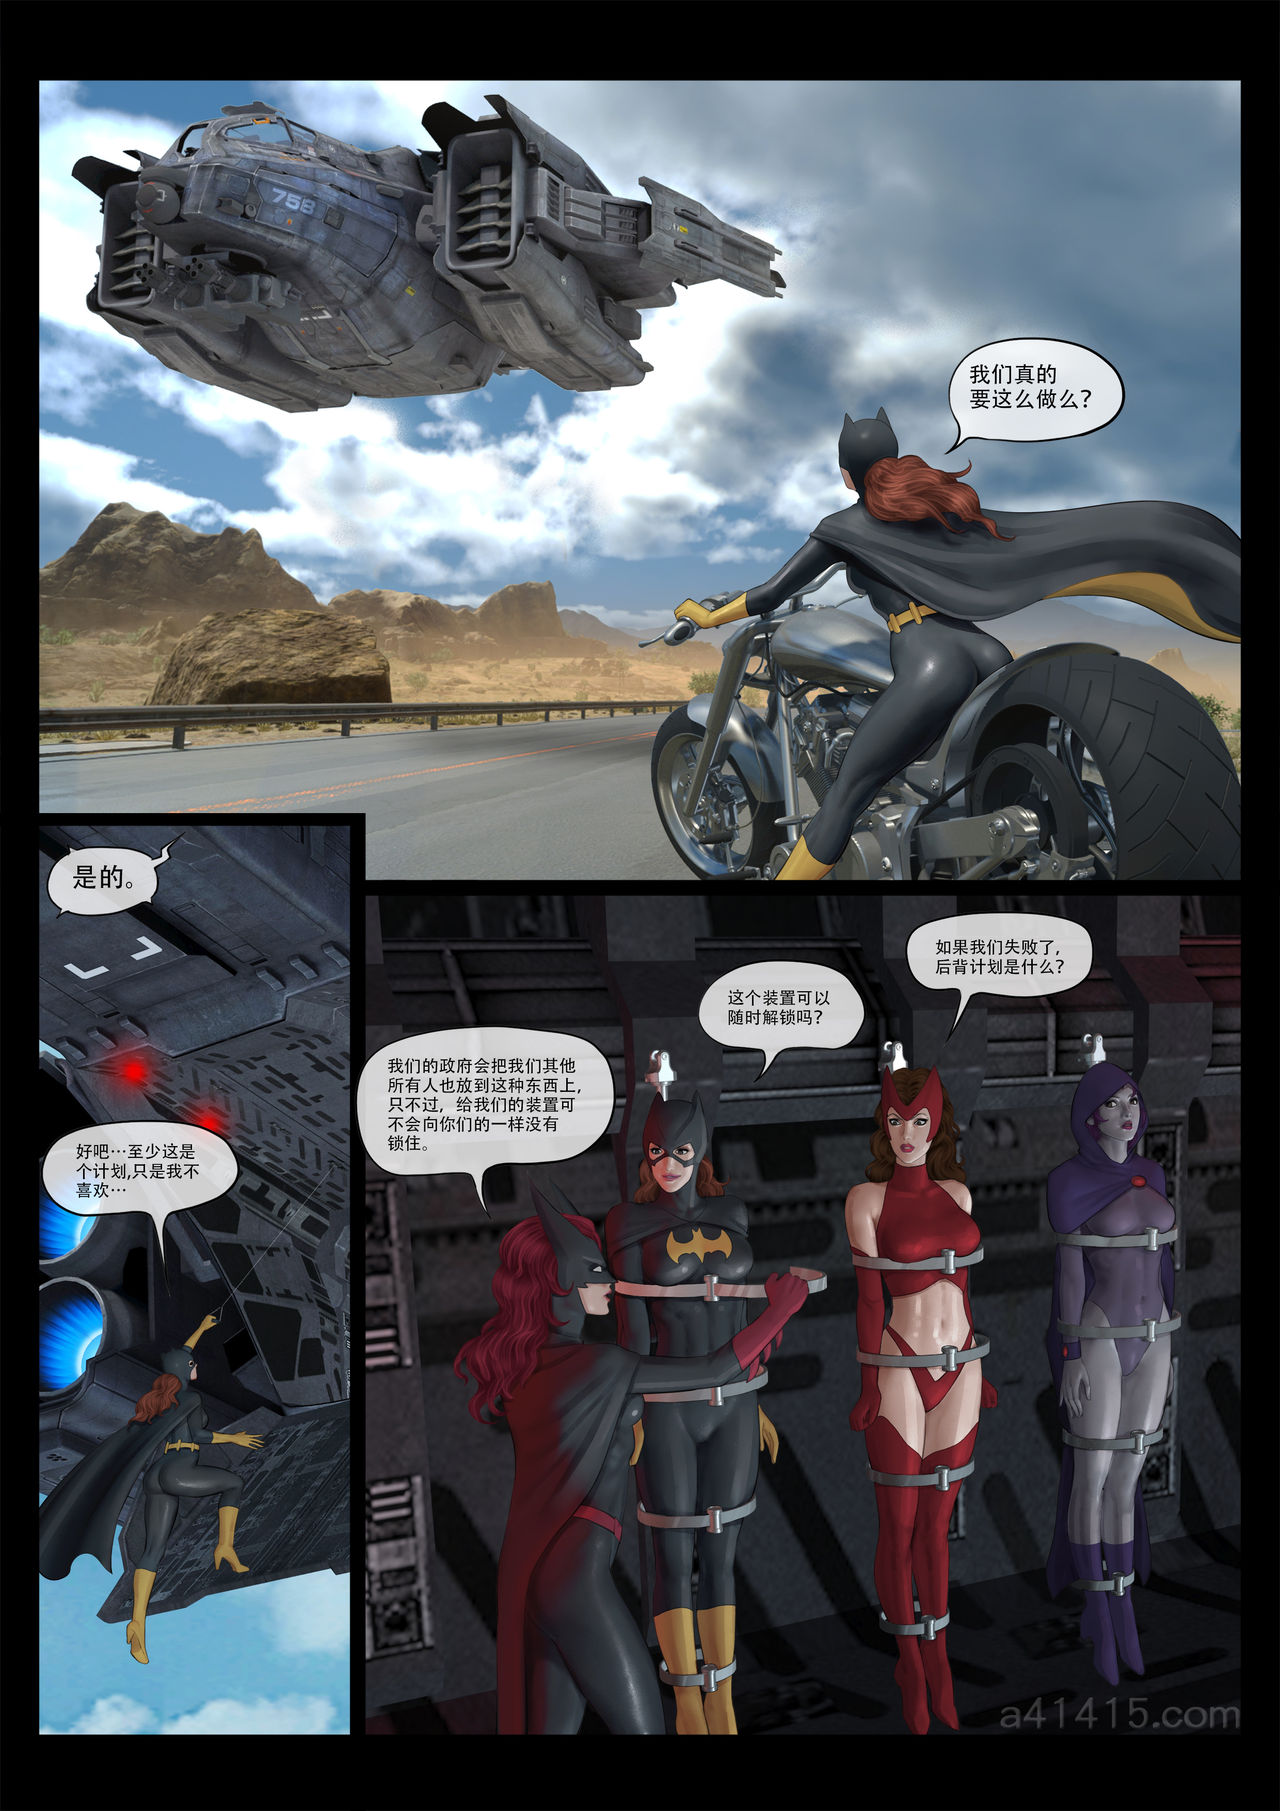 [Feather] - Avengers nightmare 01- 04 page 45 full